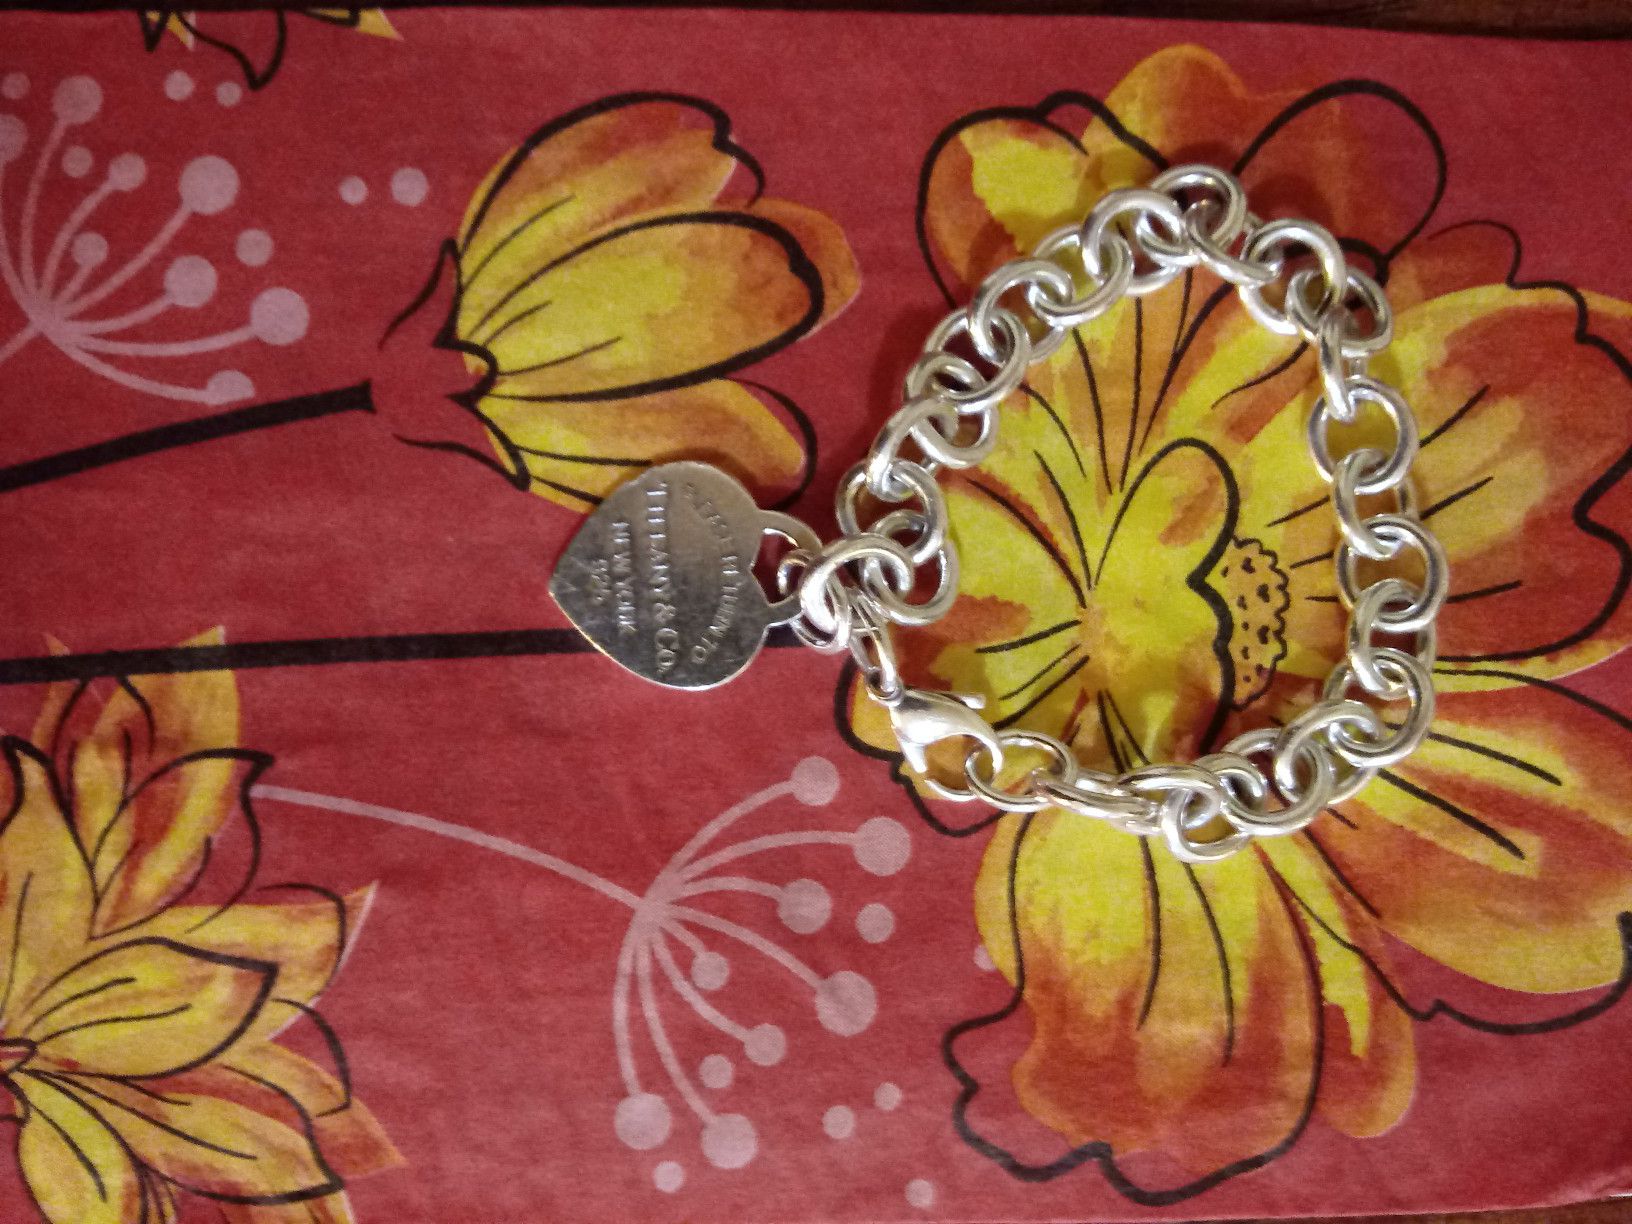 Tiffany charm bracelet, used and in good condition